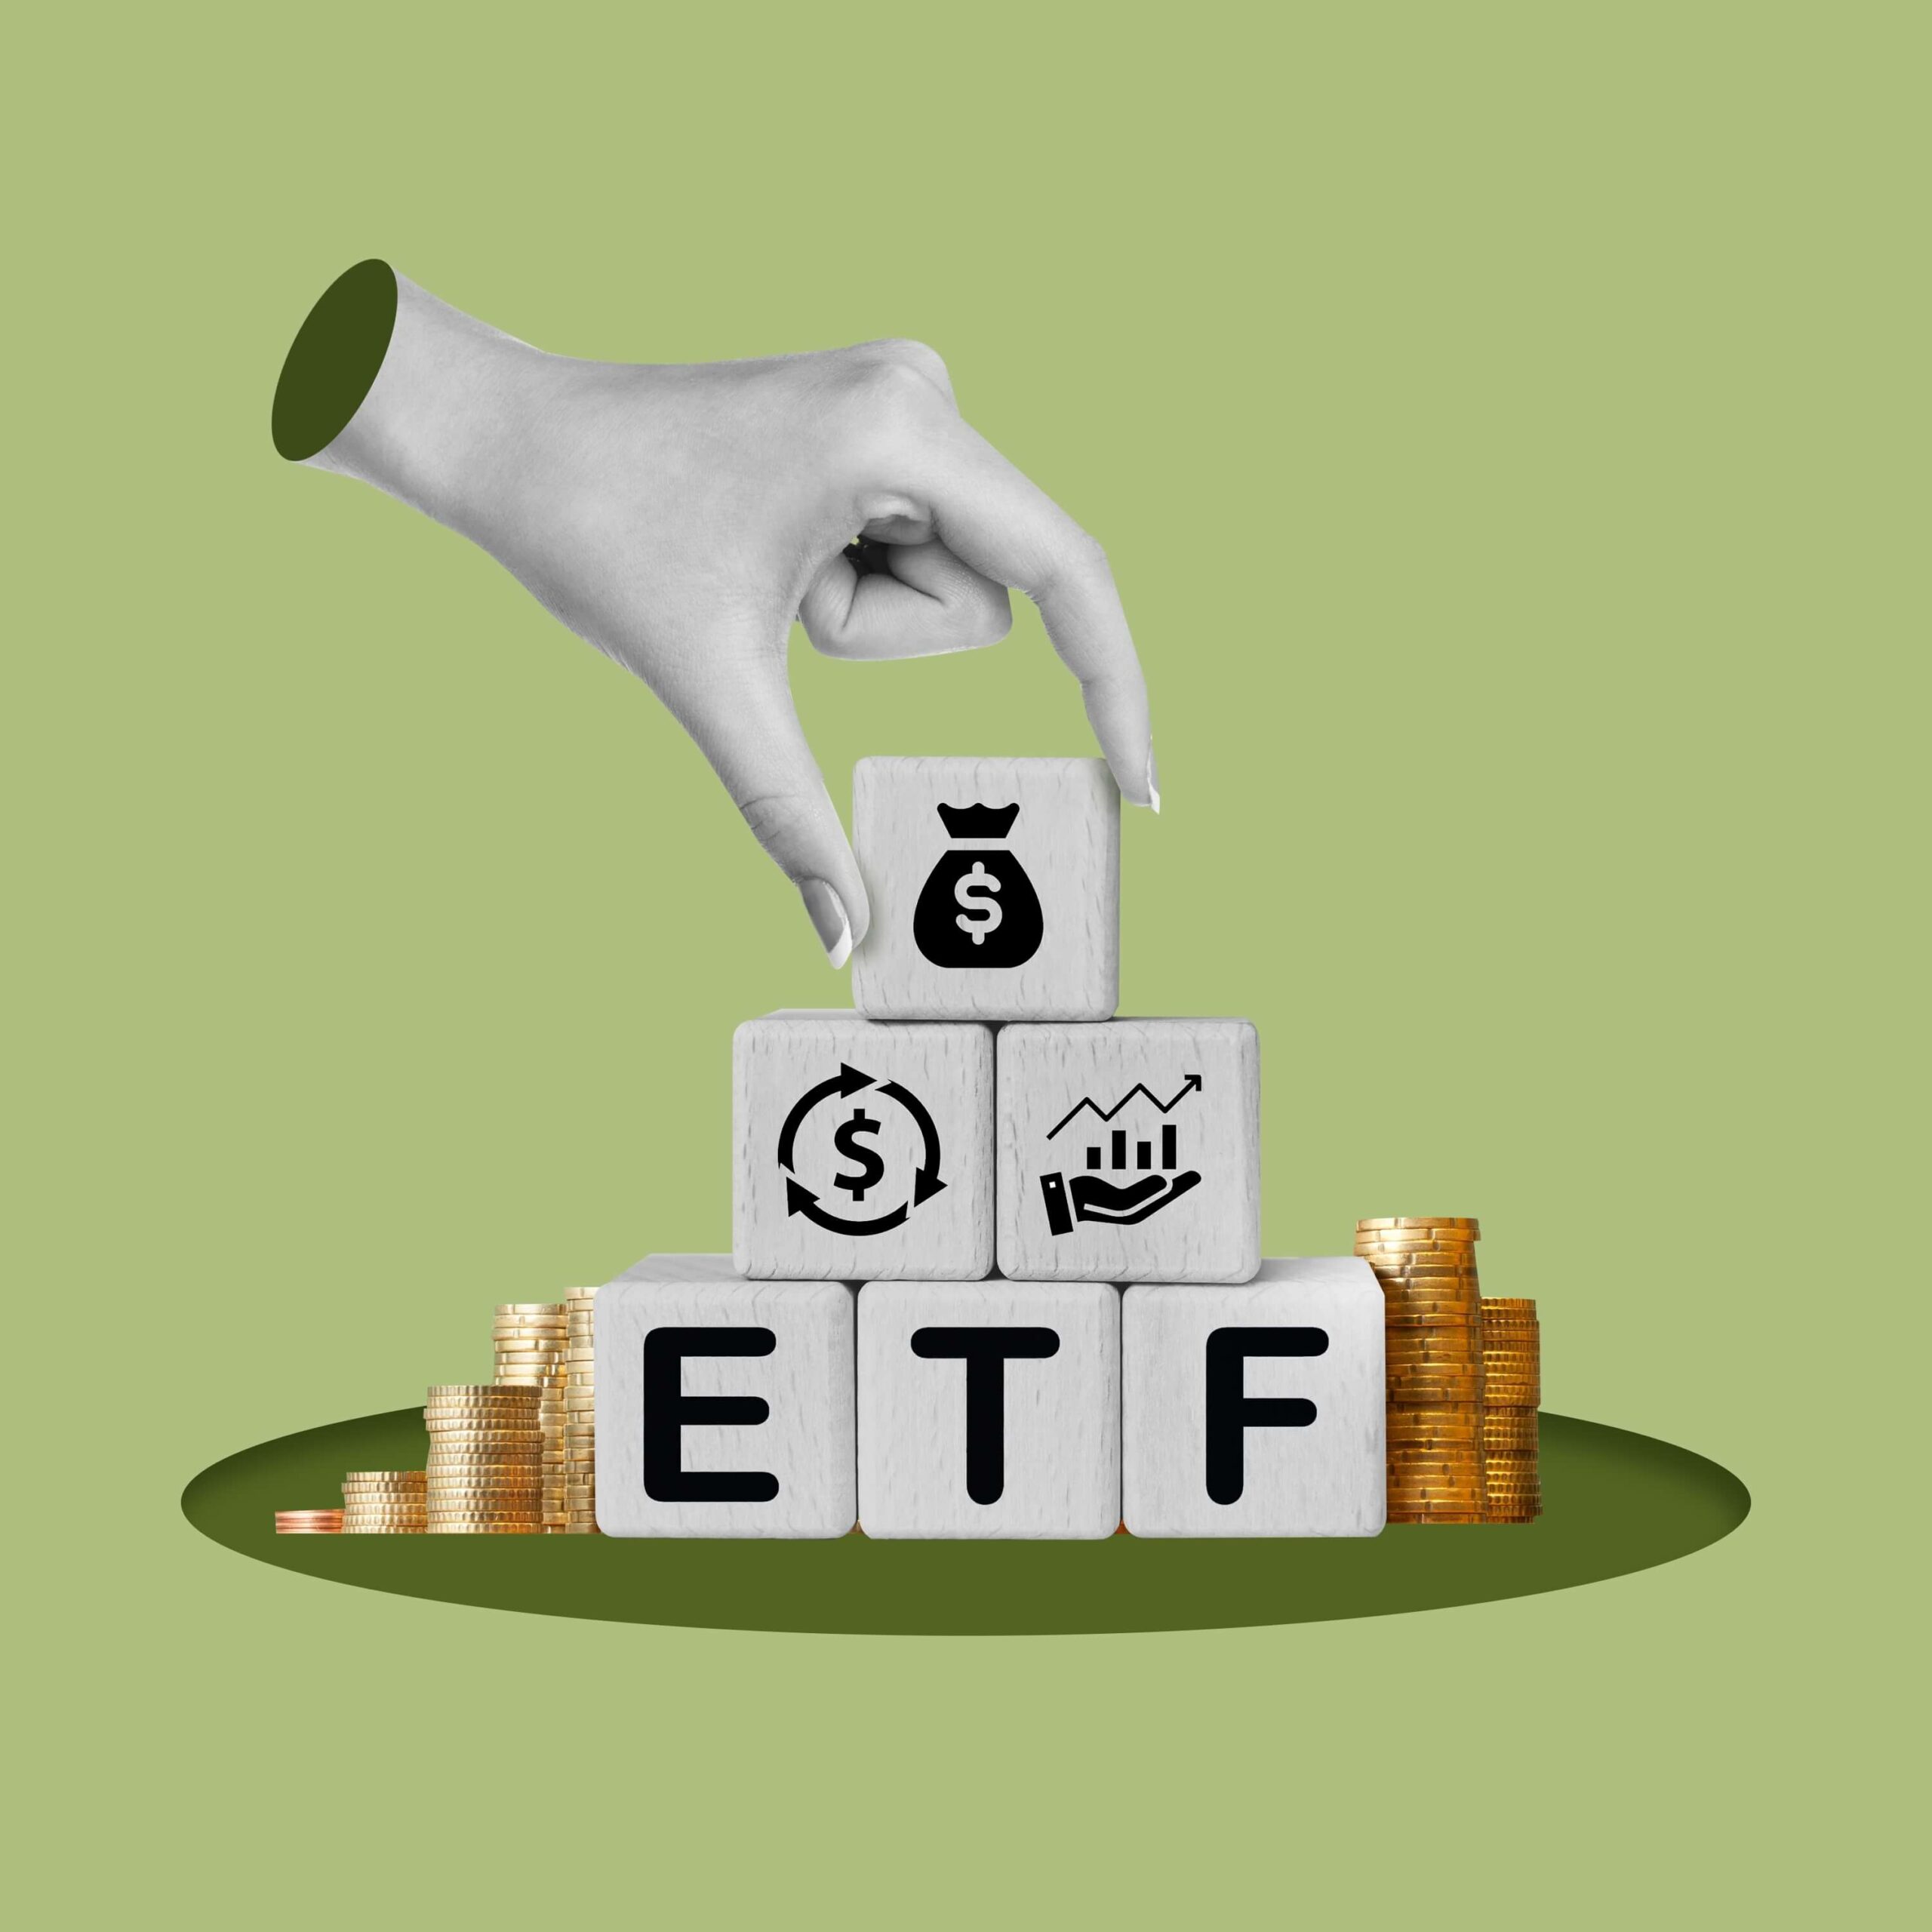 ETF illustration with green background